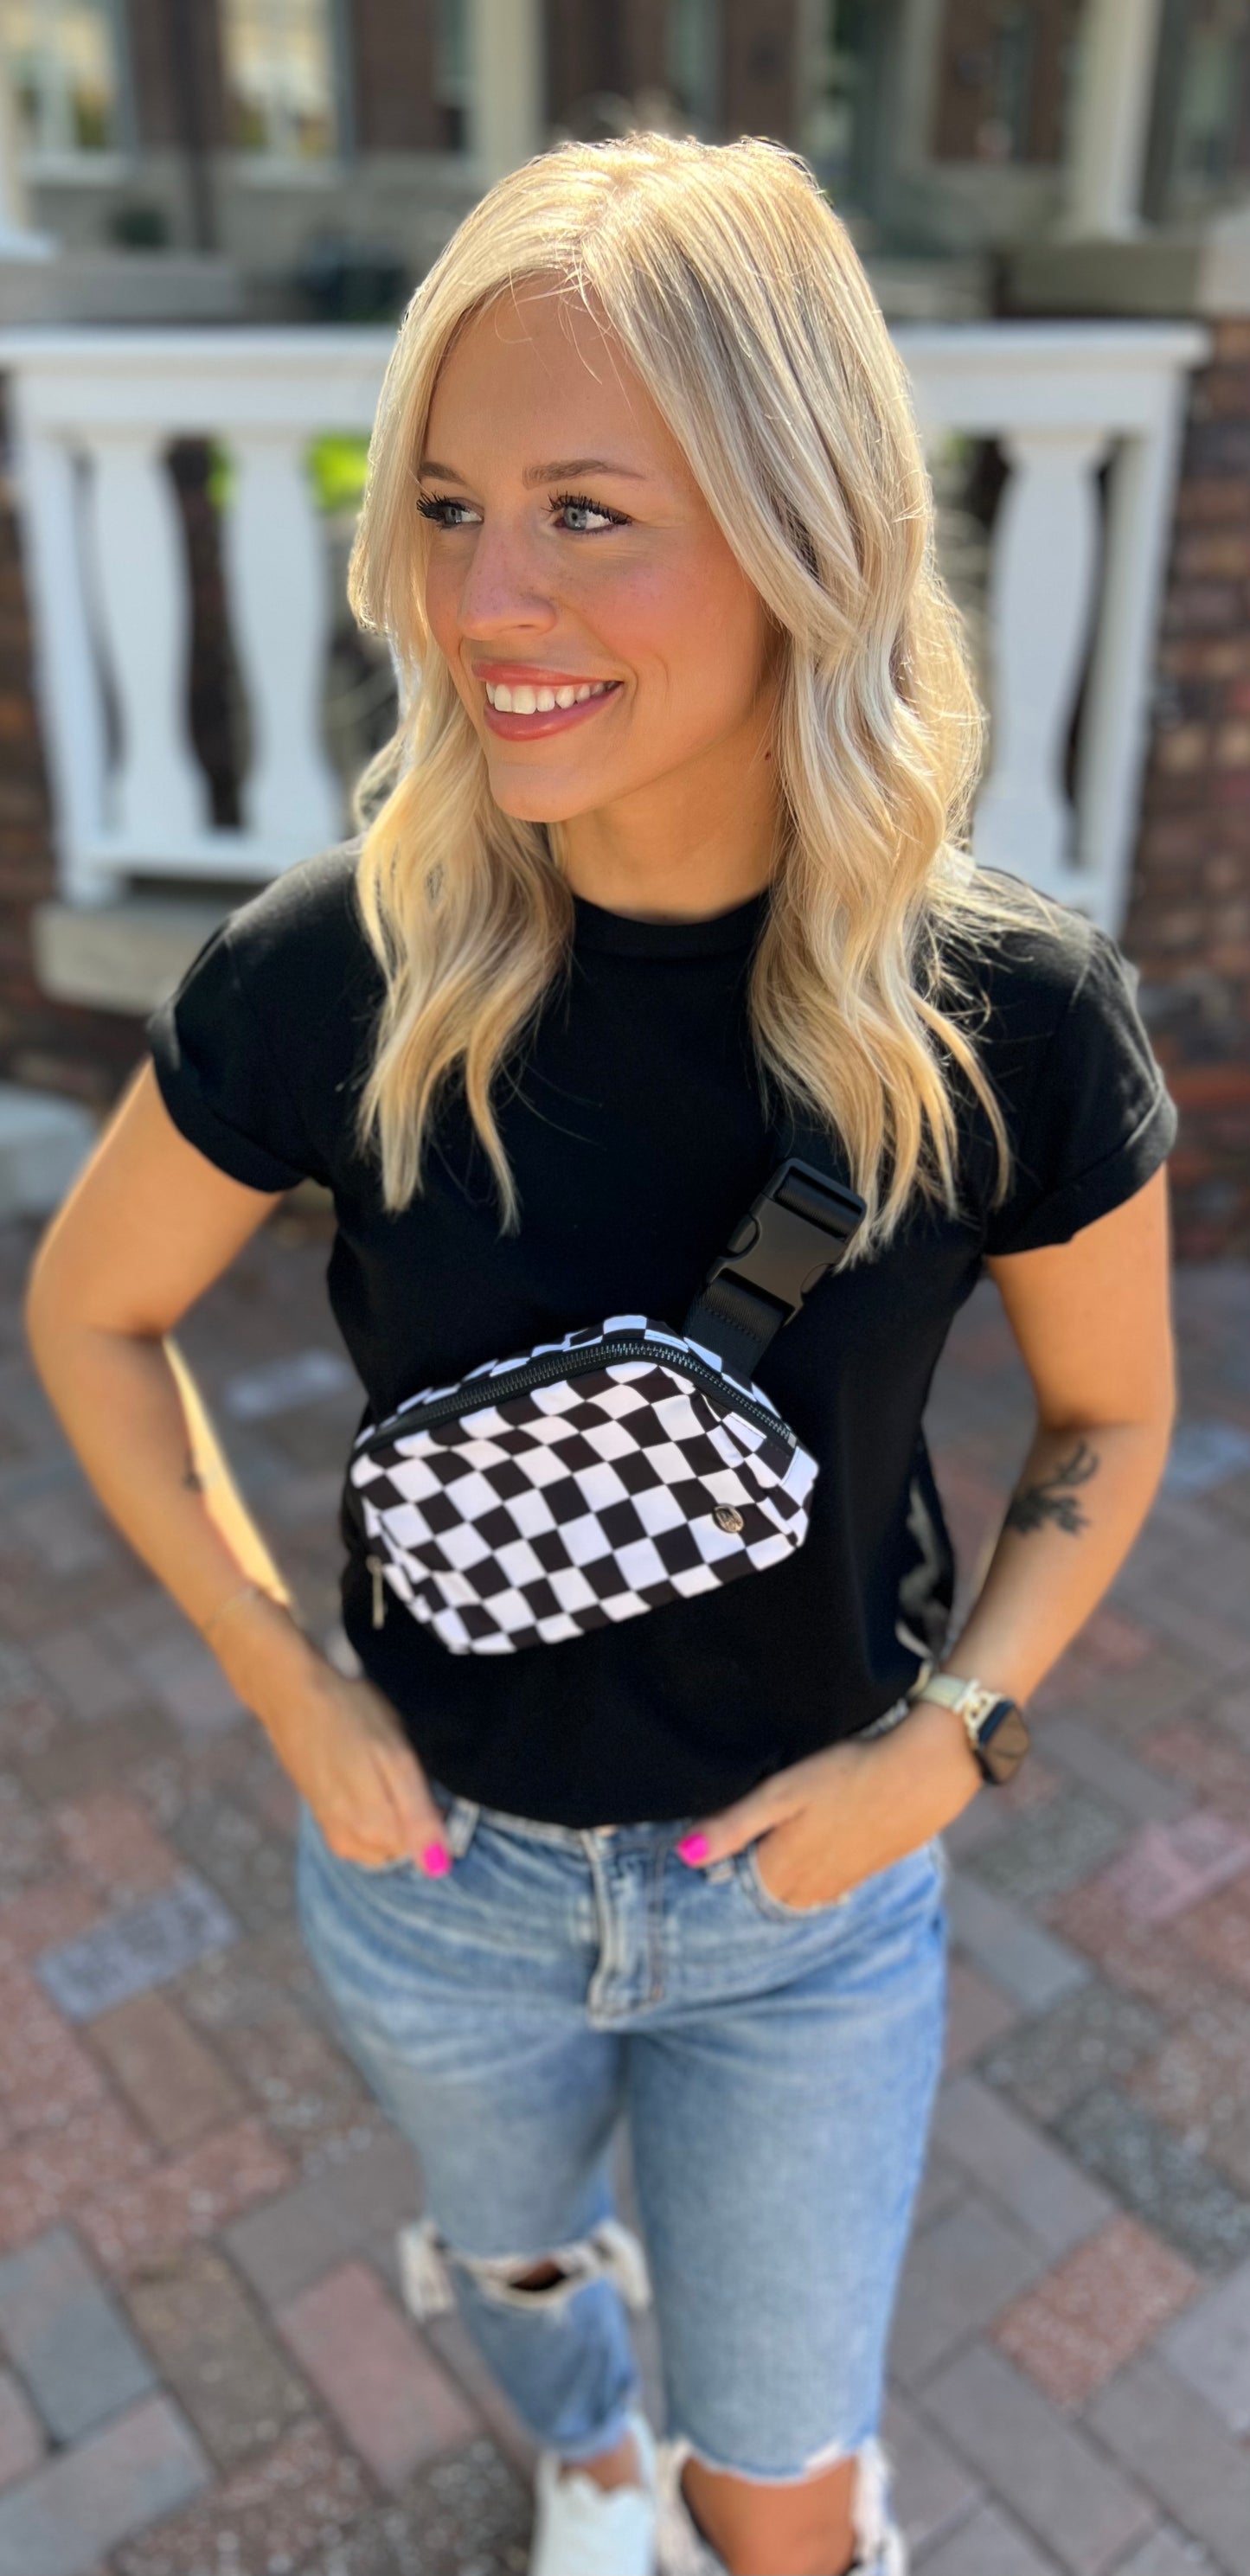 Patterned Bum Bags